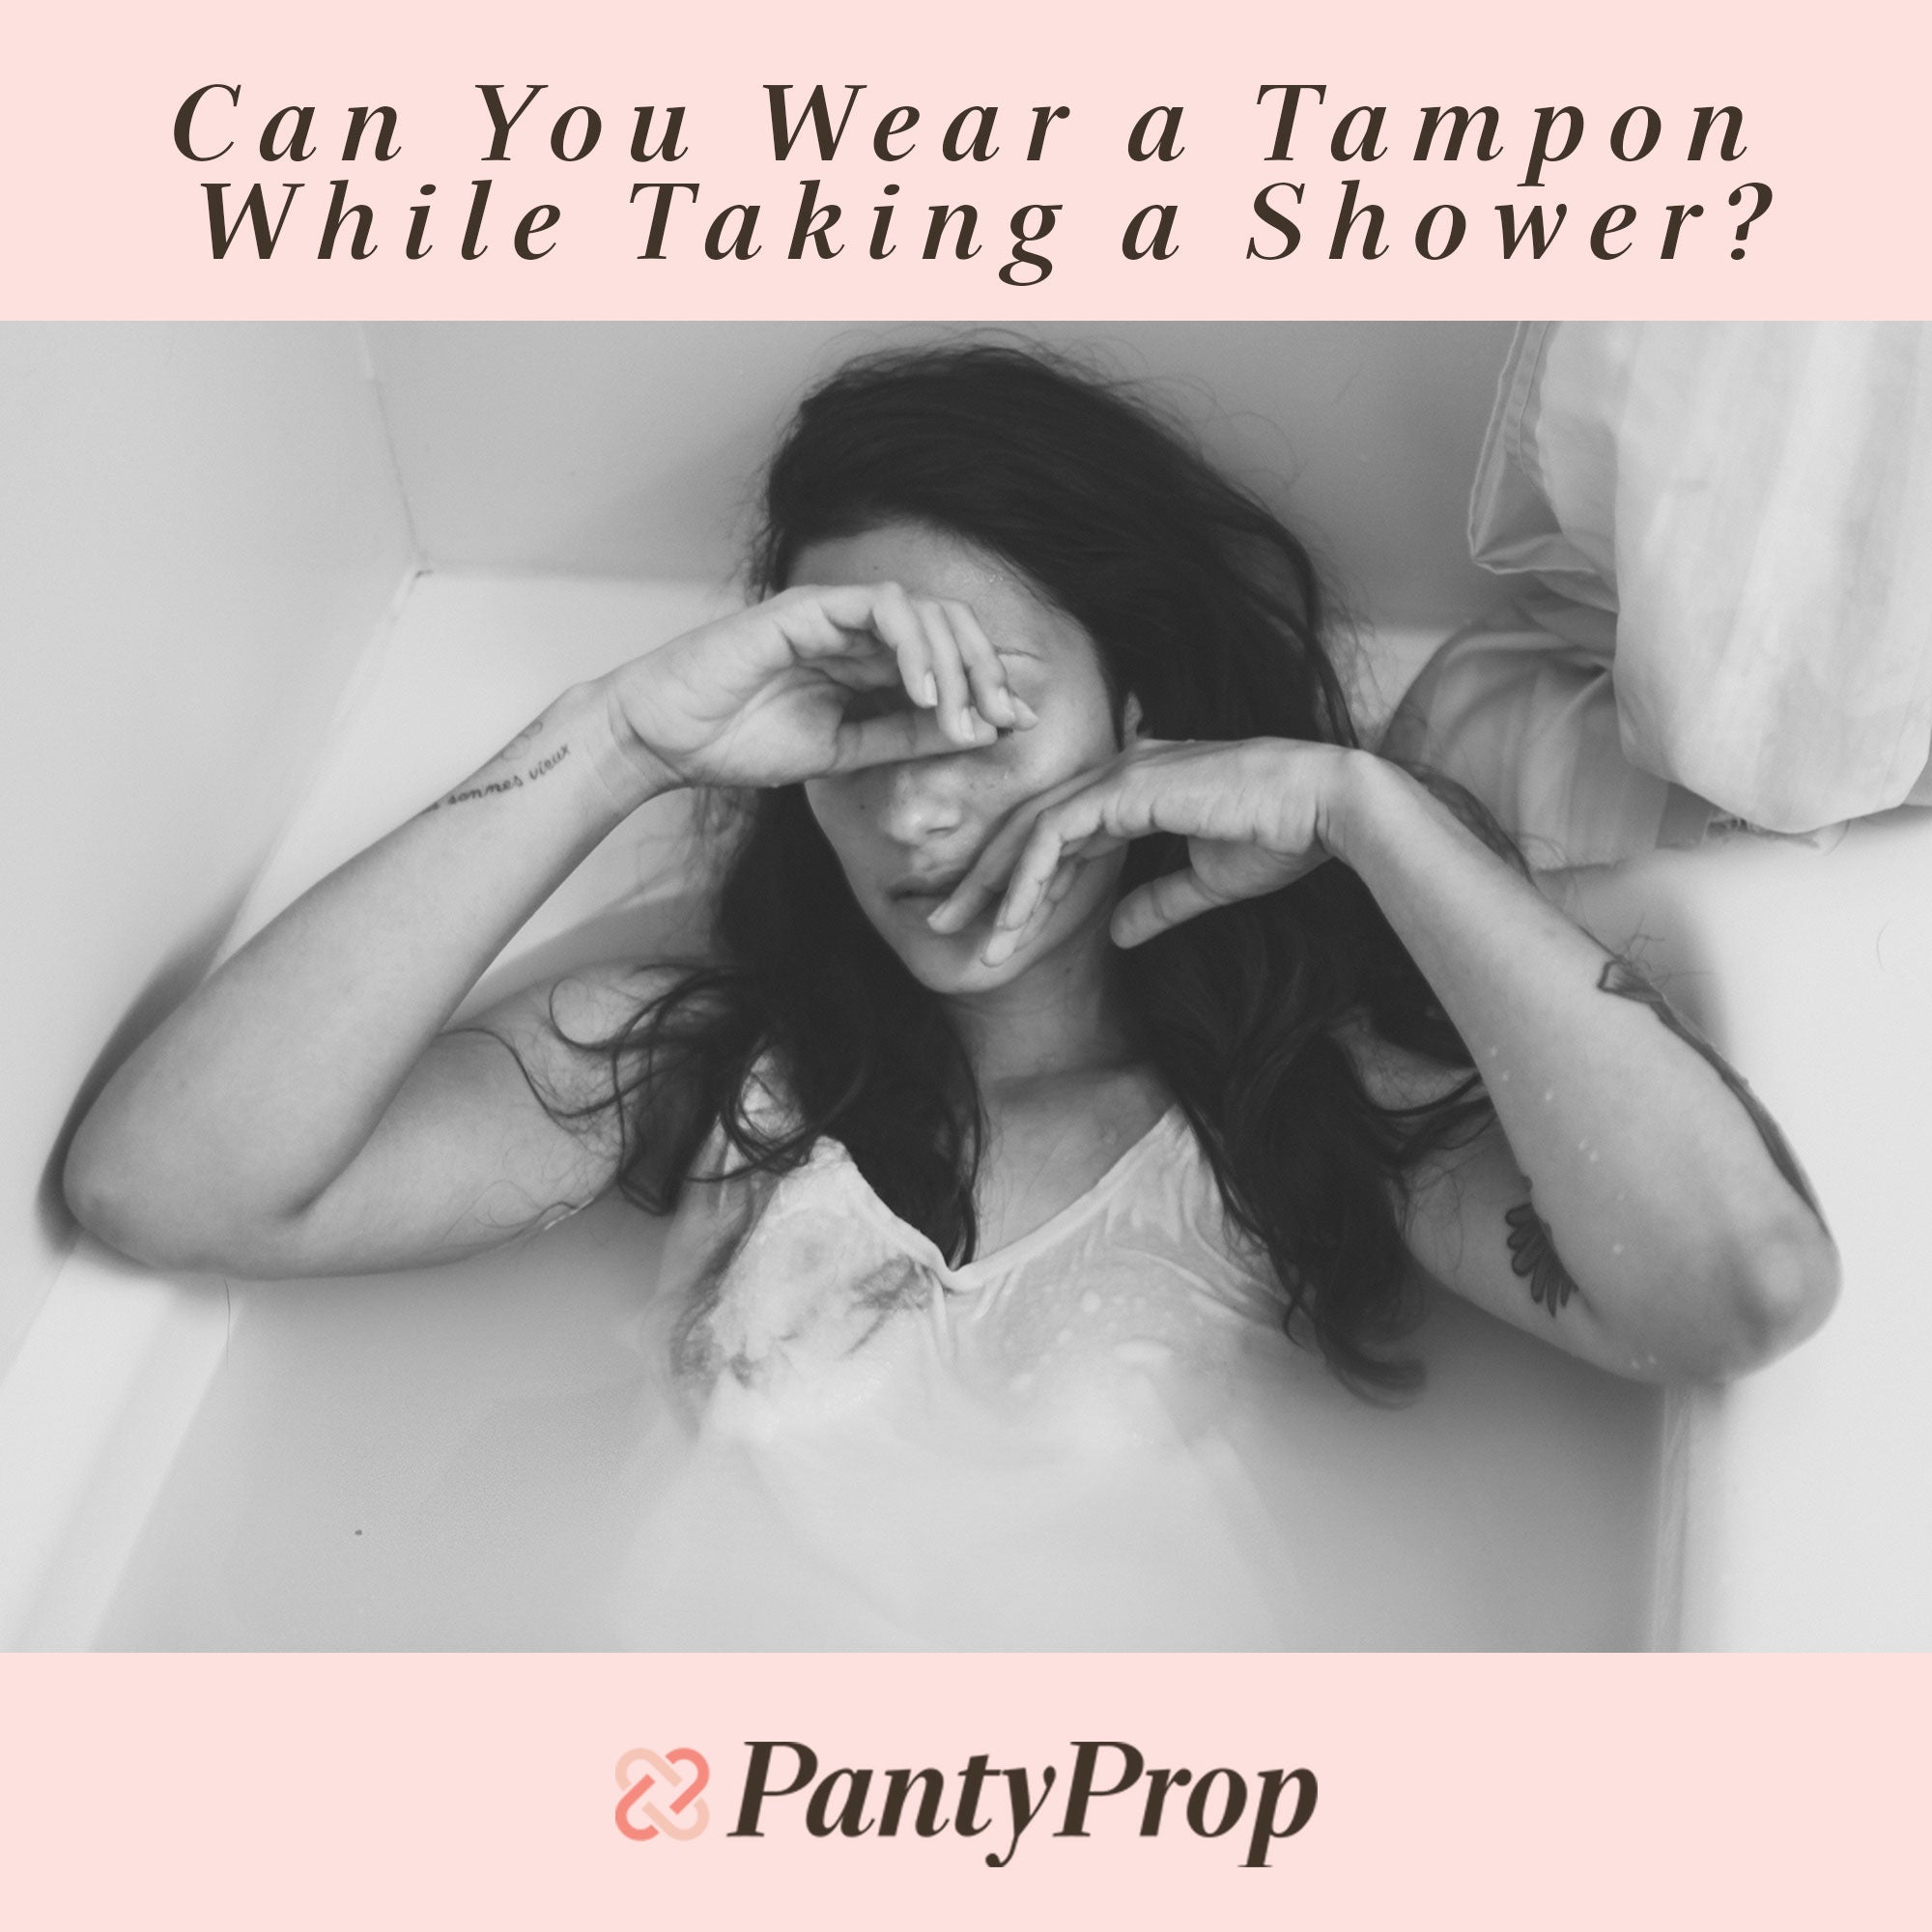 Shower WITH or WITHOUT your tampon in